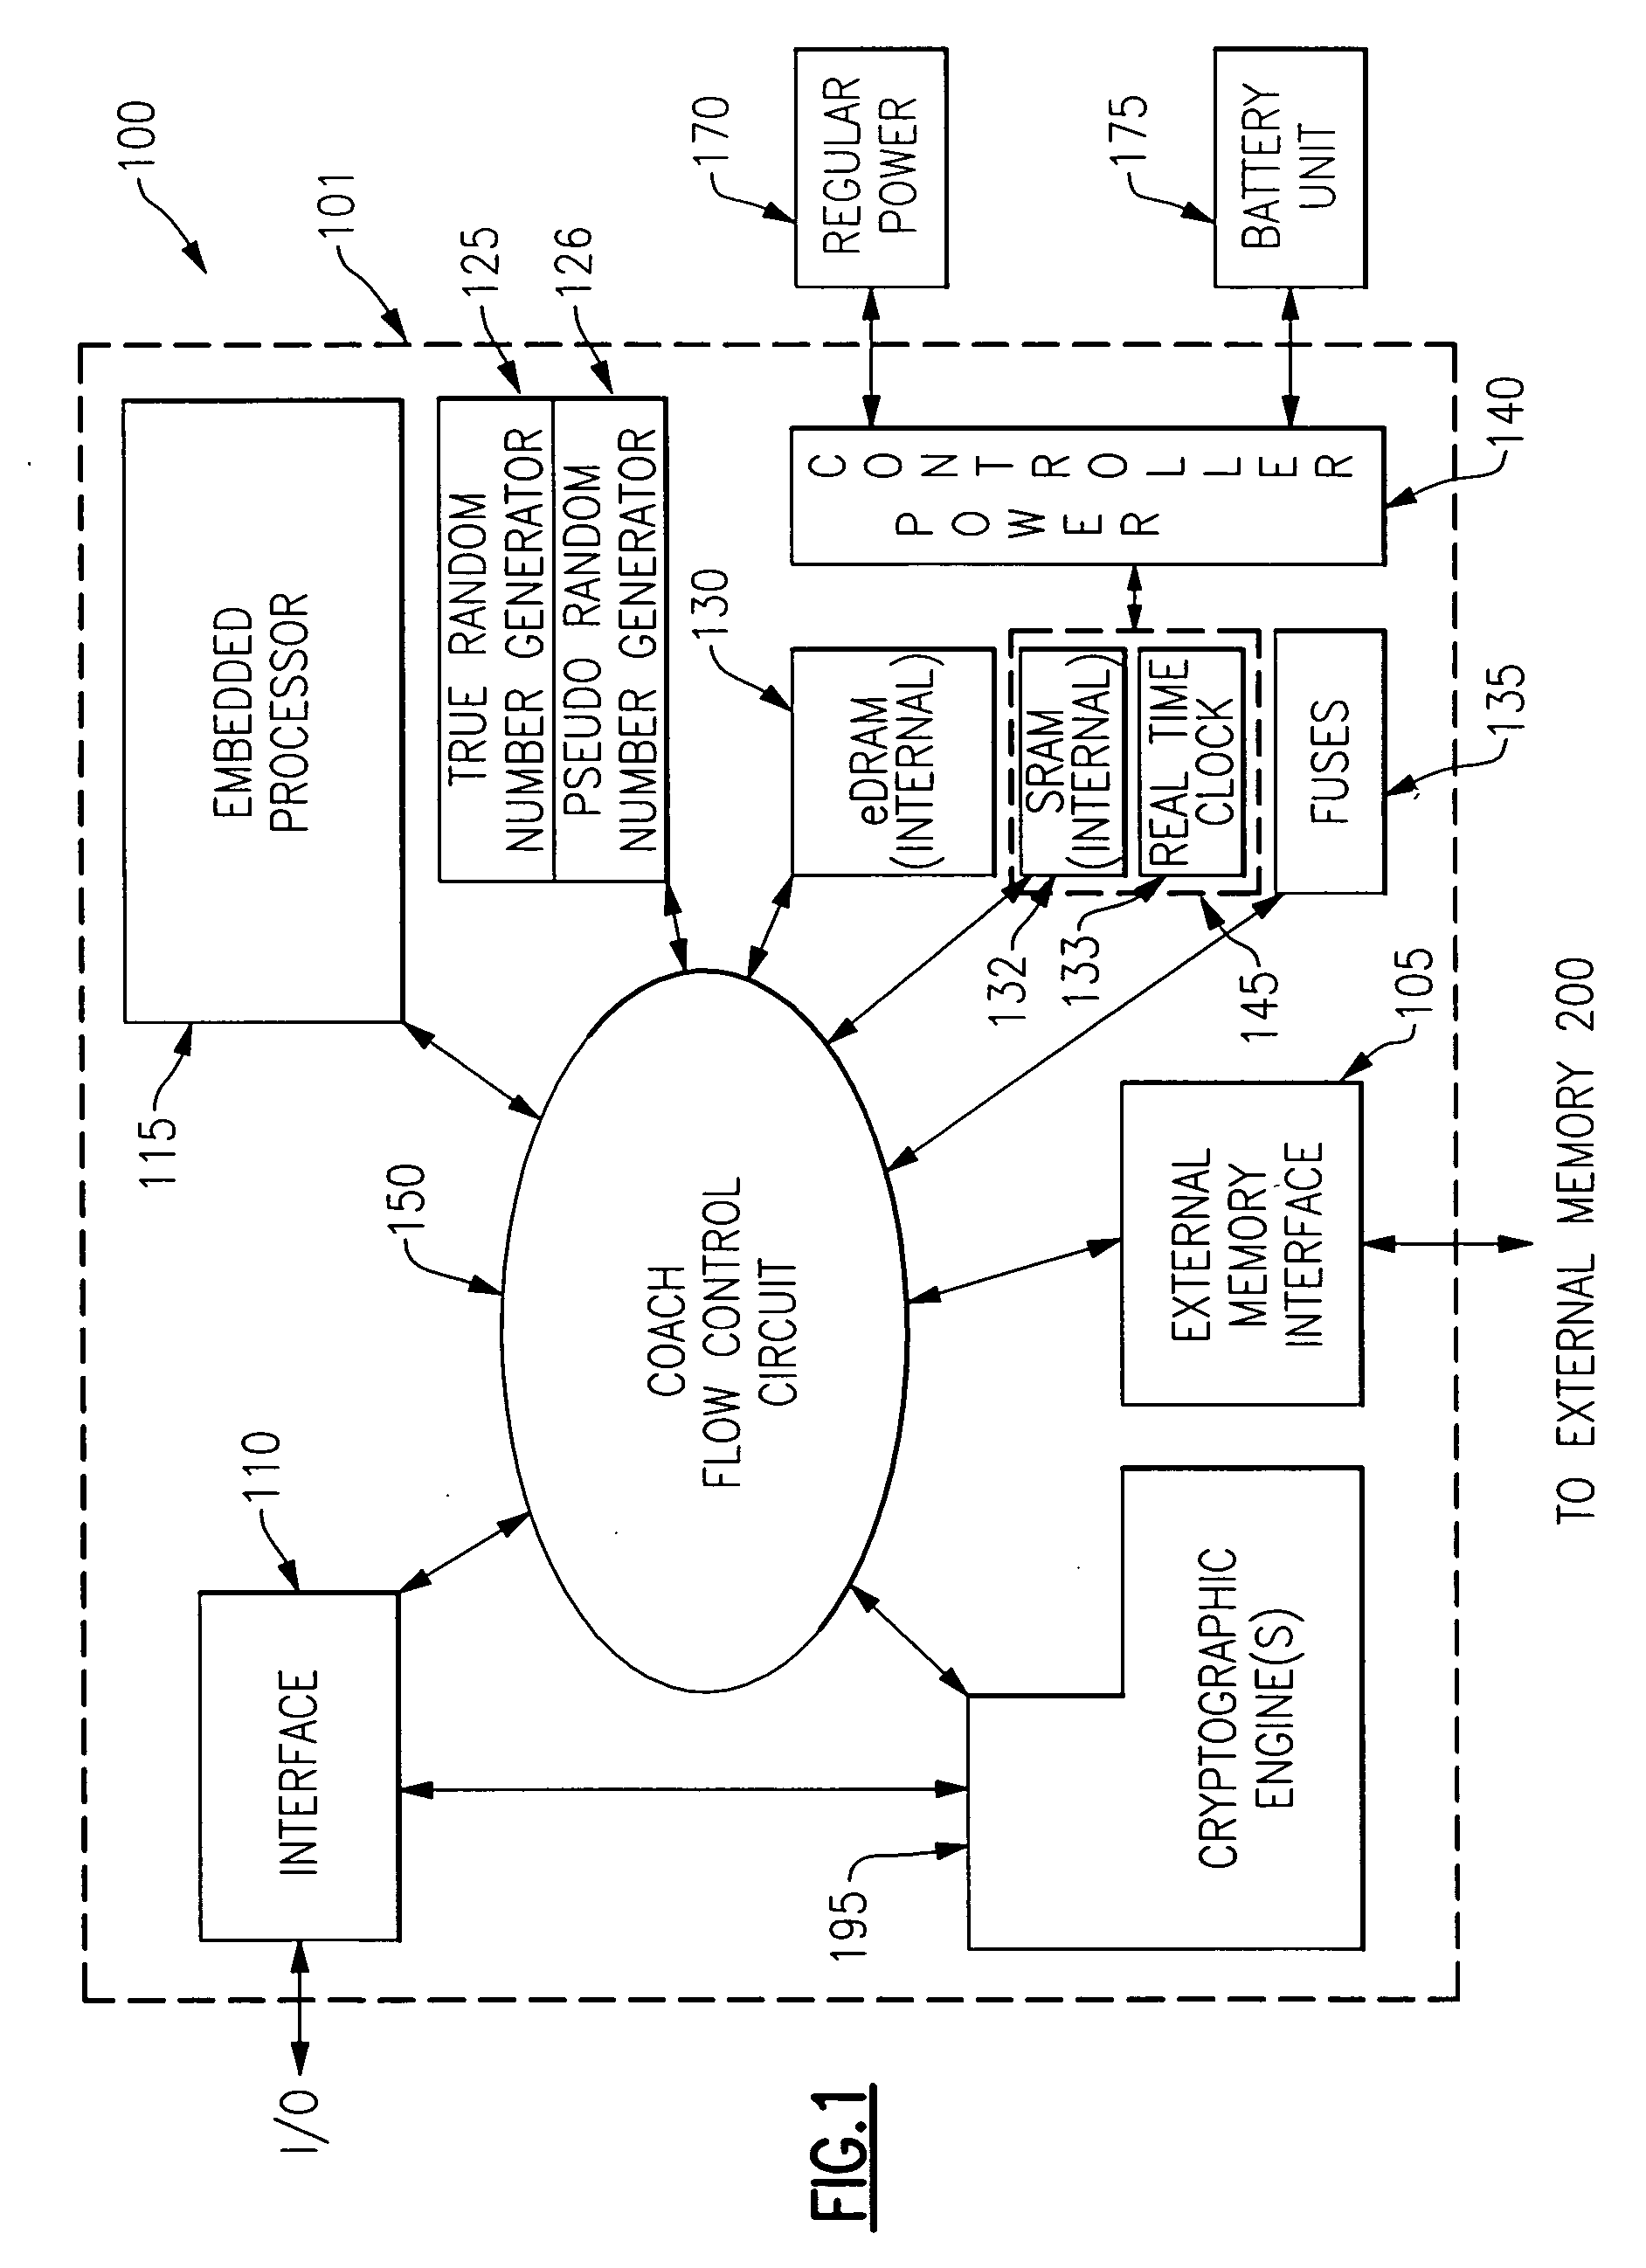 Integrated circuit chip for encryption and decryption having a secure mechanism for programming on-chip hardware